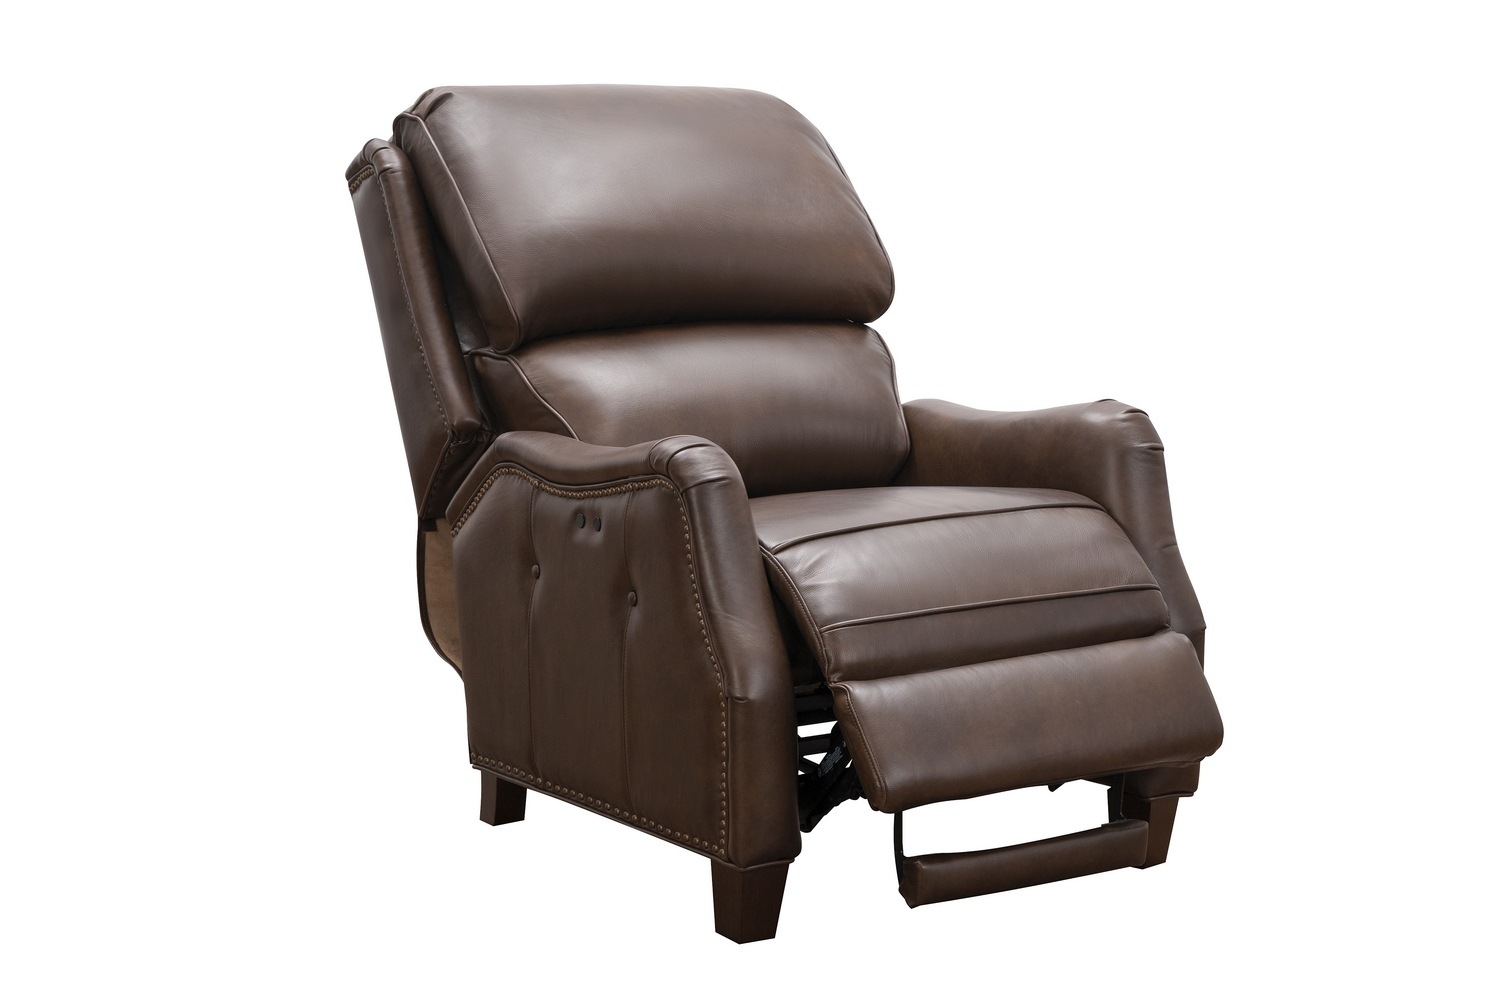 Barcalounger Morrison Big and Tall Power Recliner Chair - Ashford Walnut/All Leather